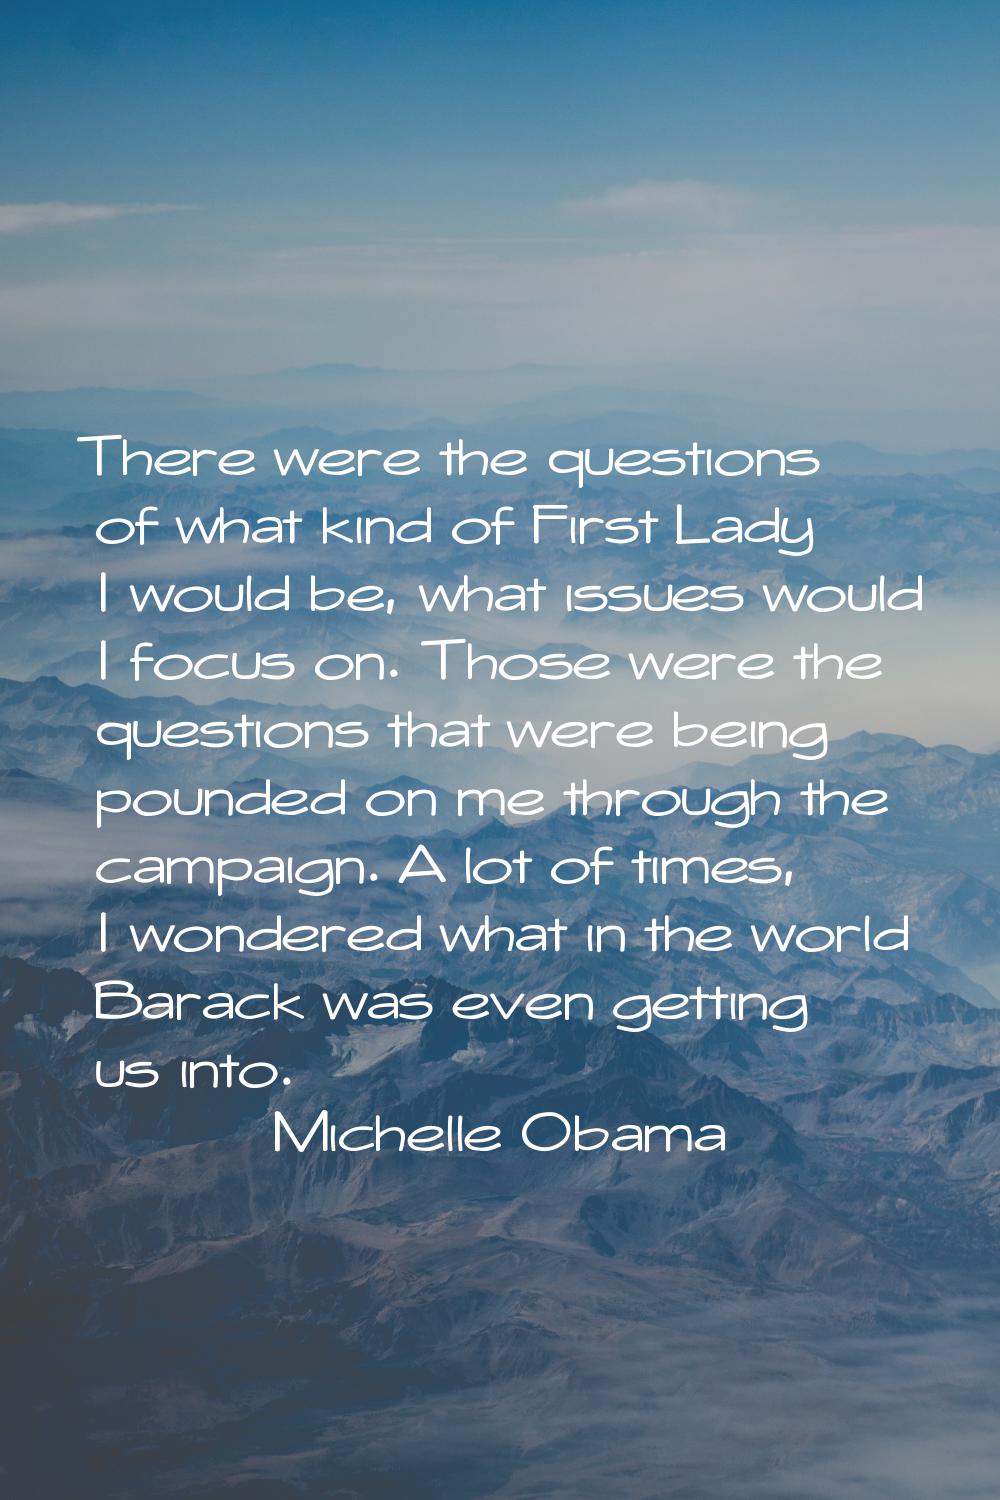 There were the questions of what kind of First Lady I would be, what issues would I focus on. Those